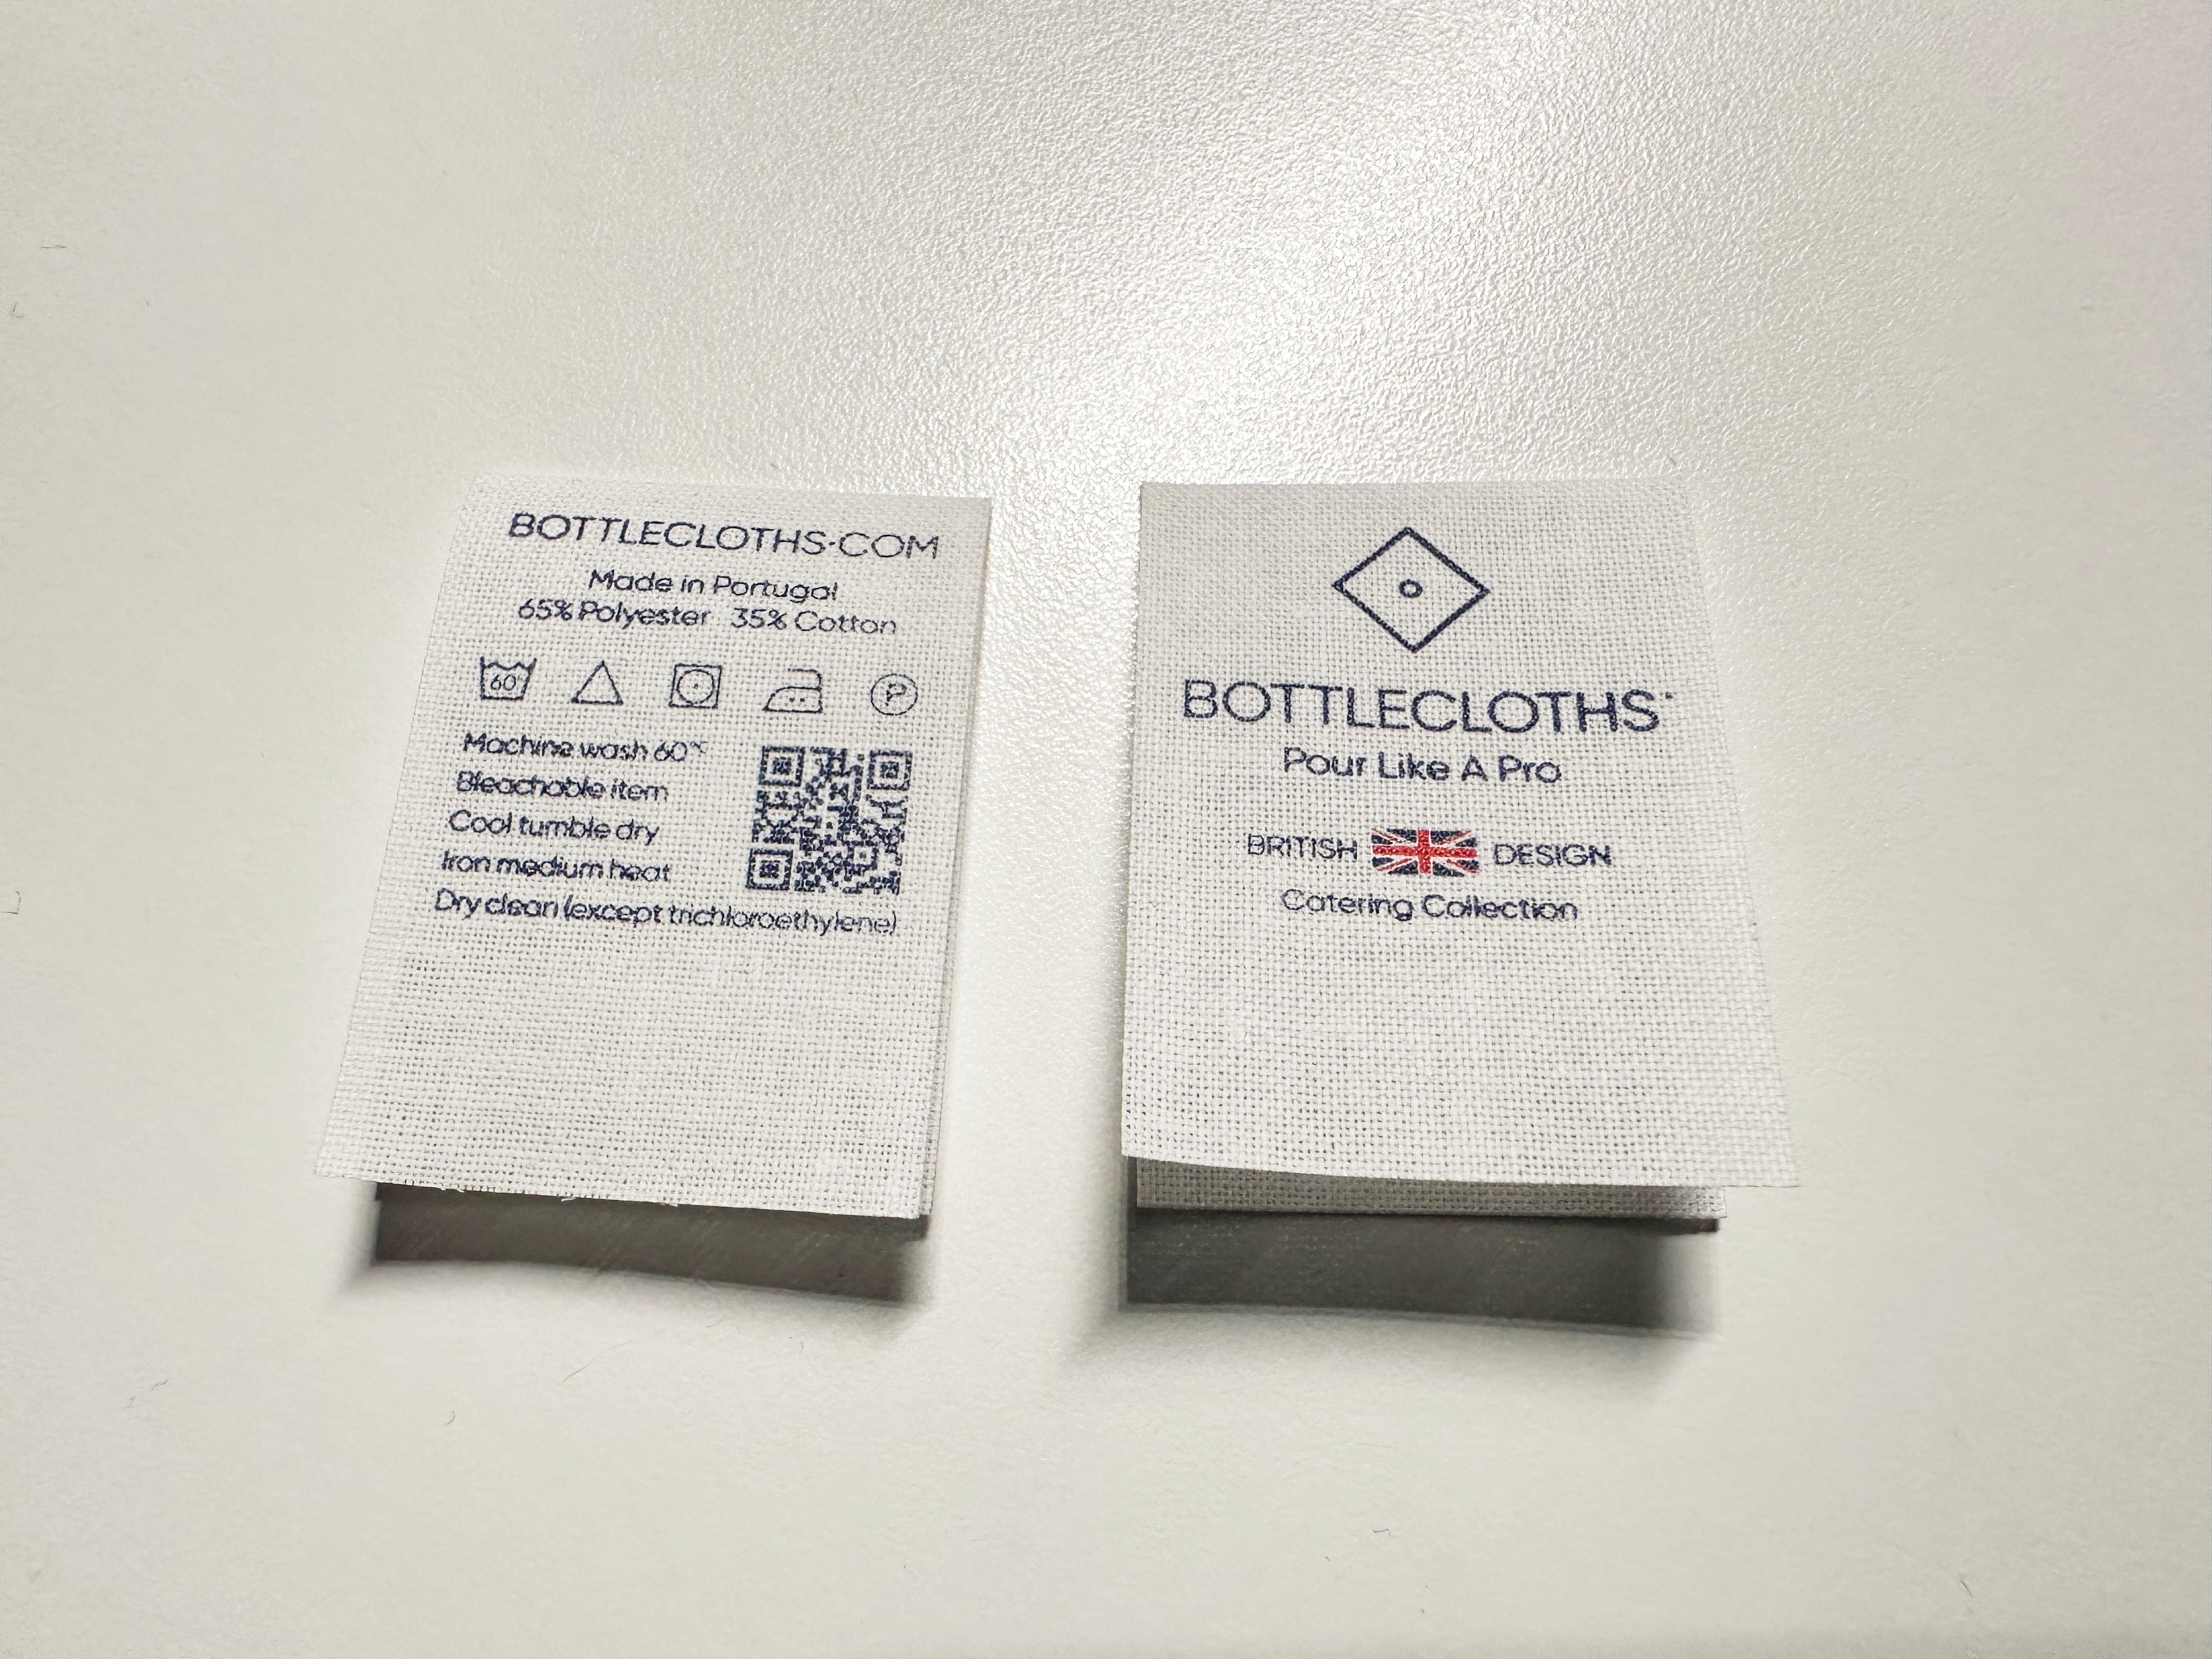 Hot of the press! BottleCloth tags @ 30mm